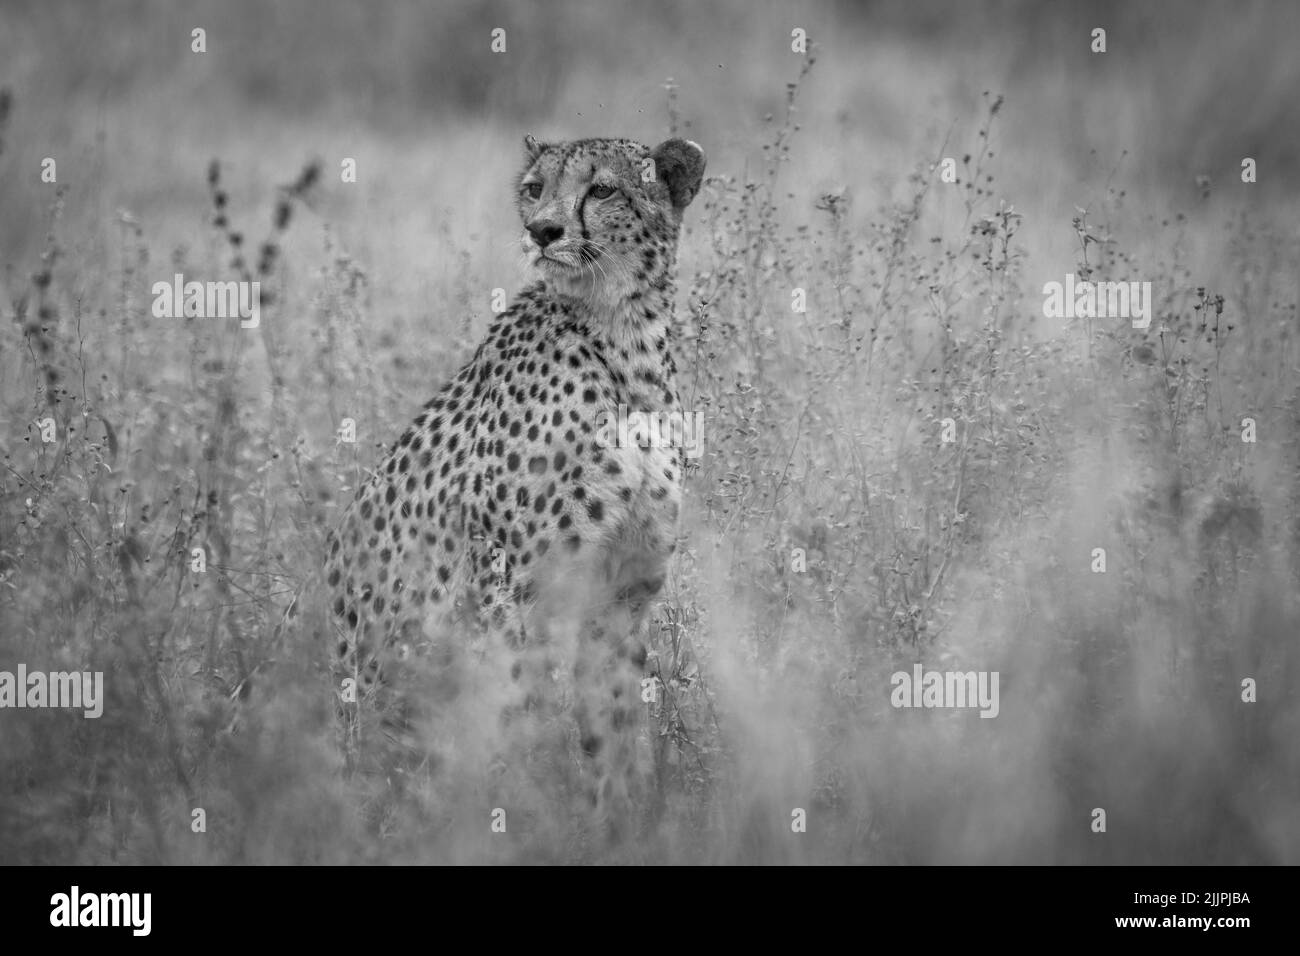 Cheetah sitting on haunches in grass field - black and white Stock Photo